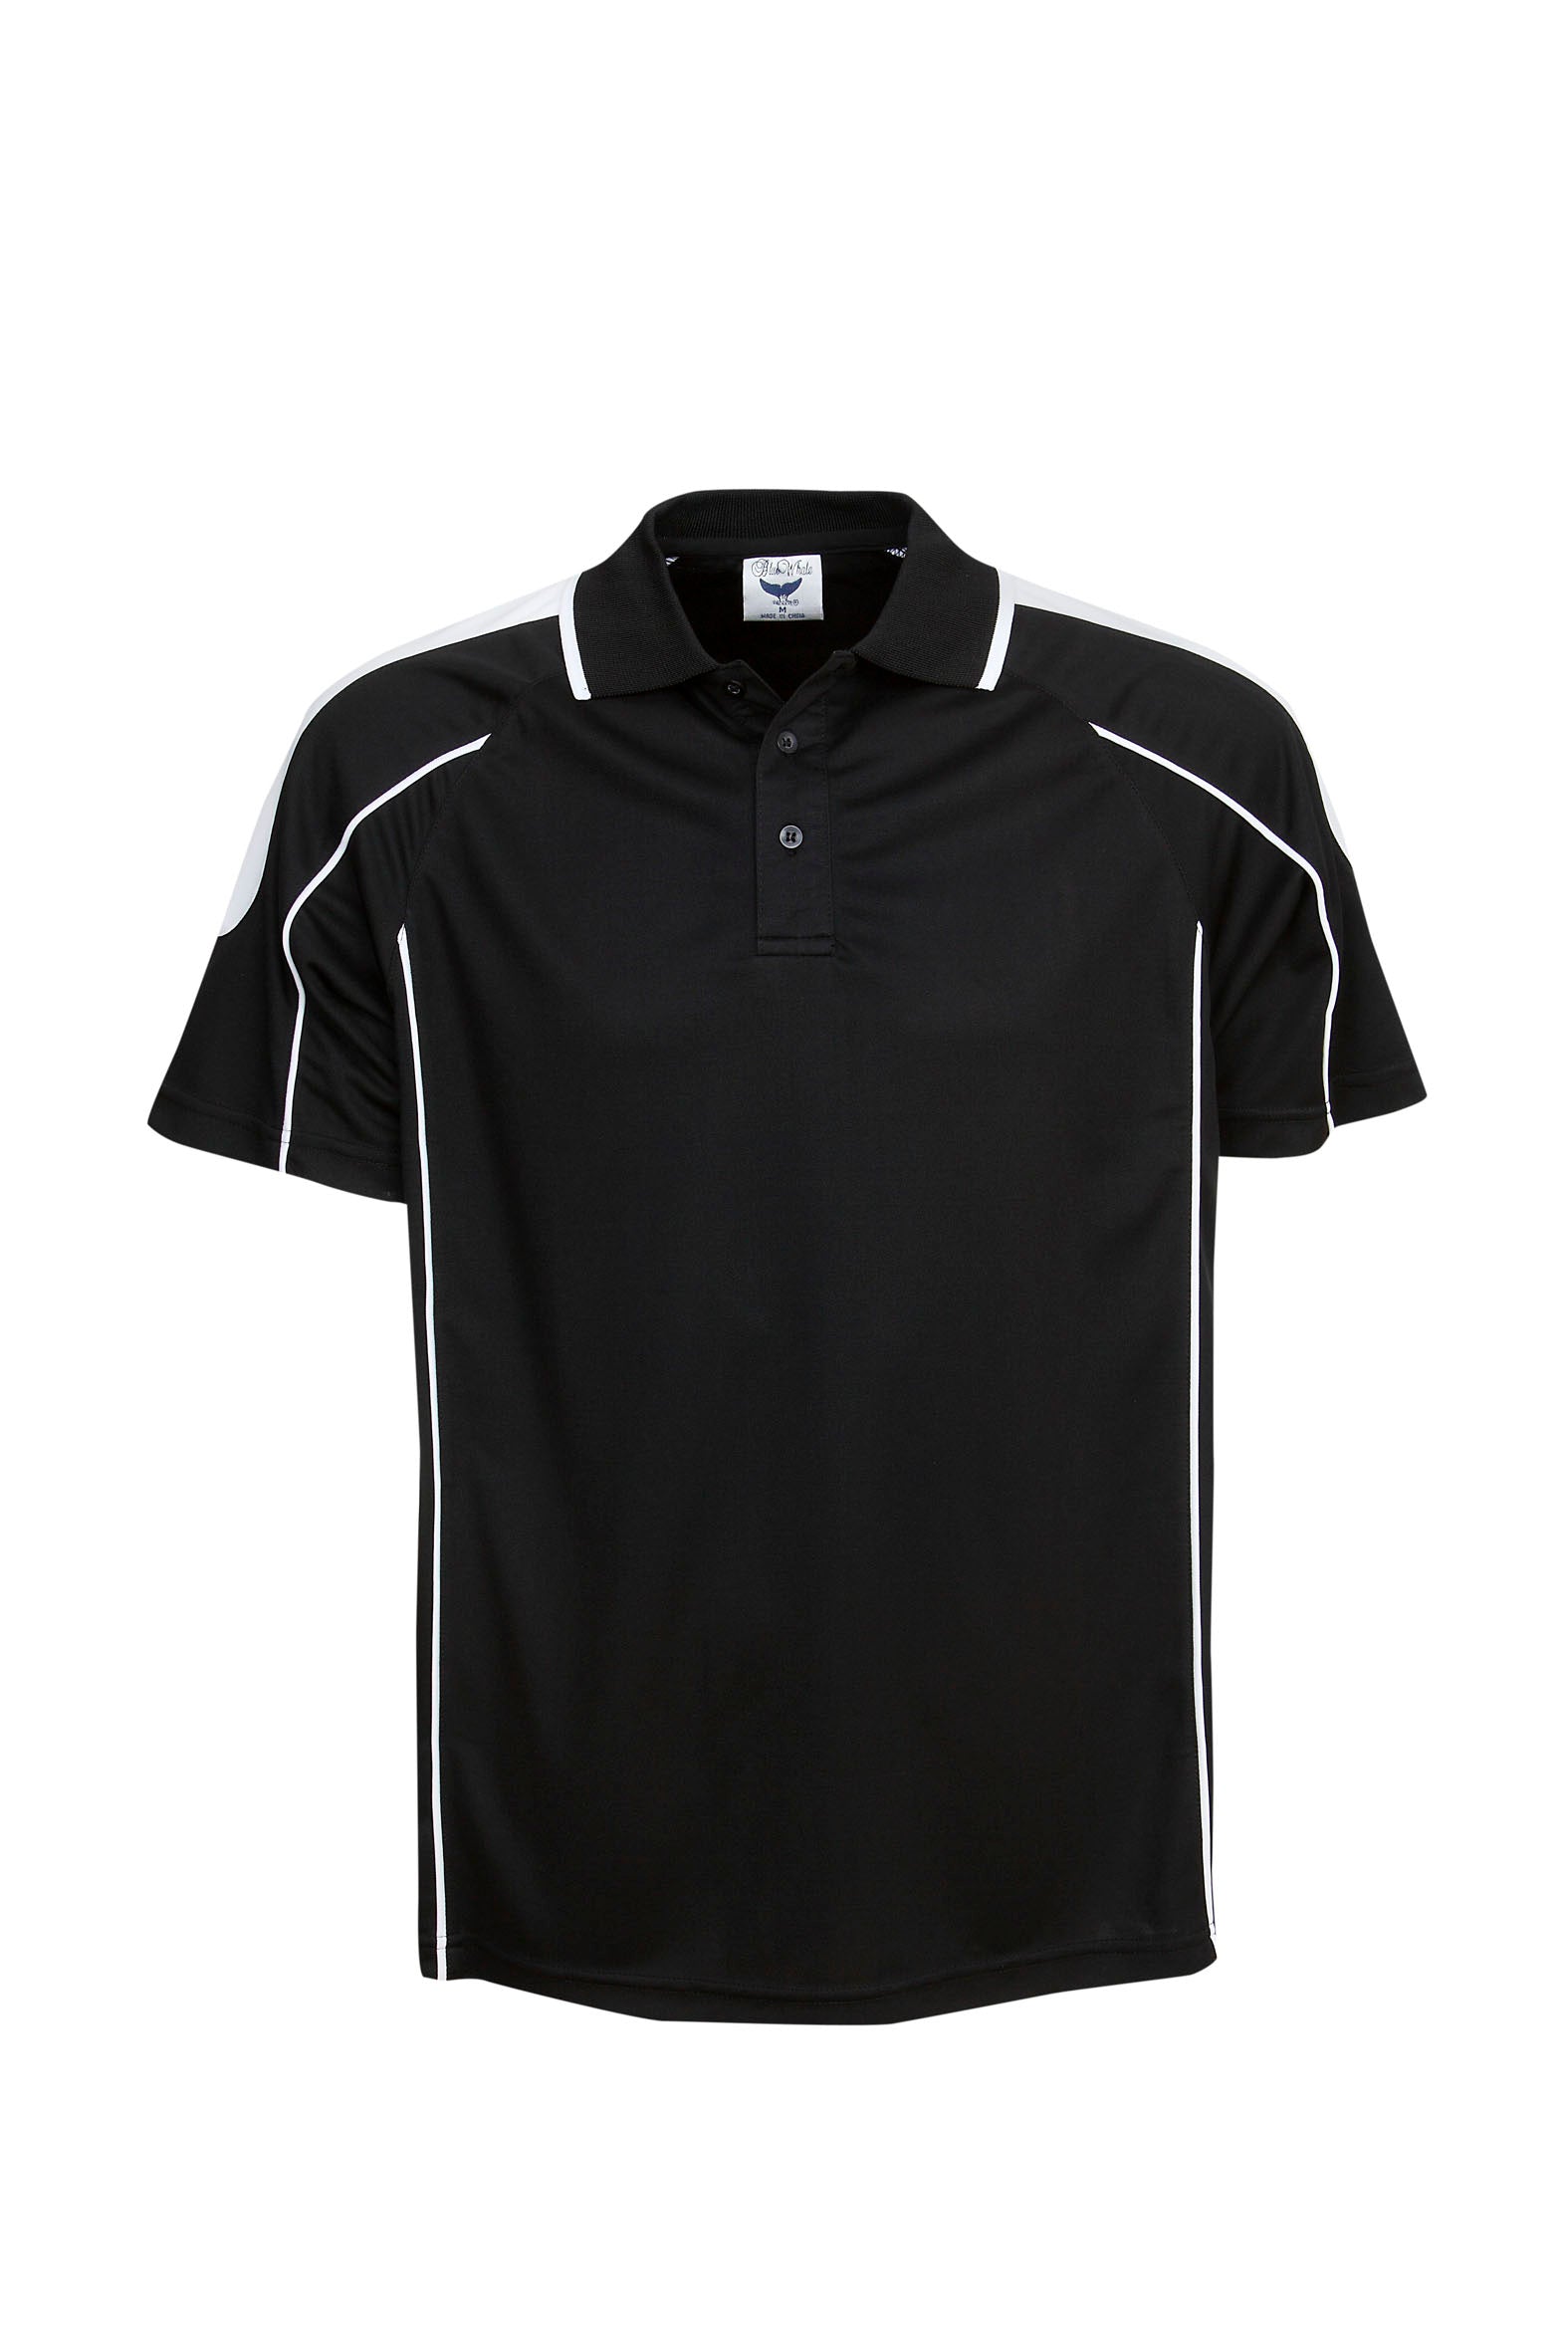 12 Pack P44 Black/White Polos | Front Embroidery OR Back Vinyl Included